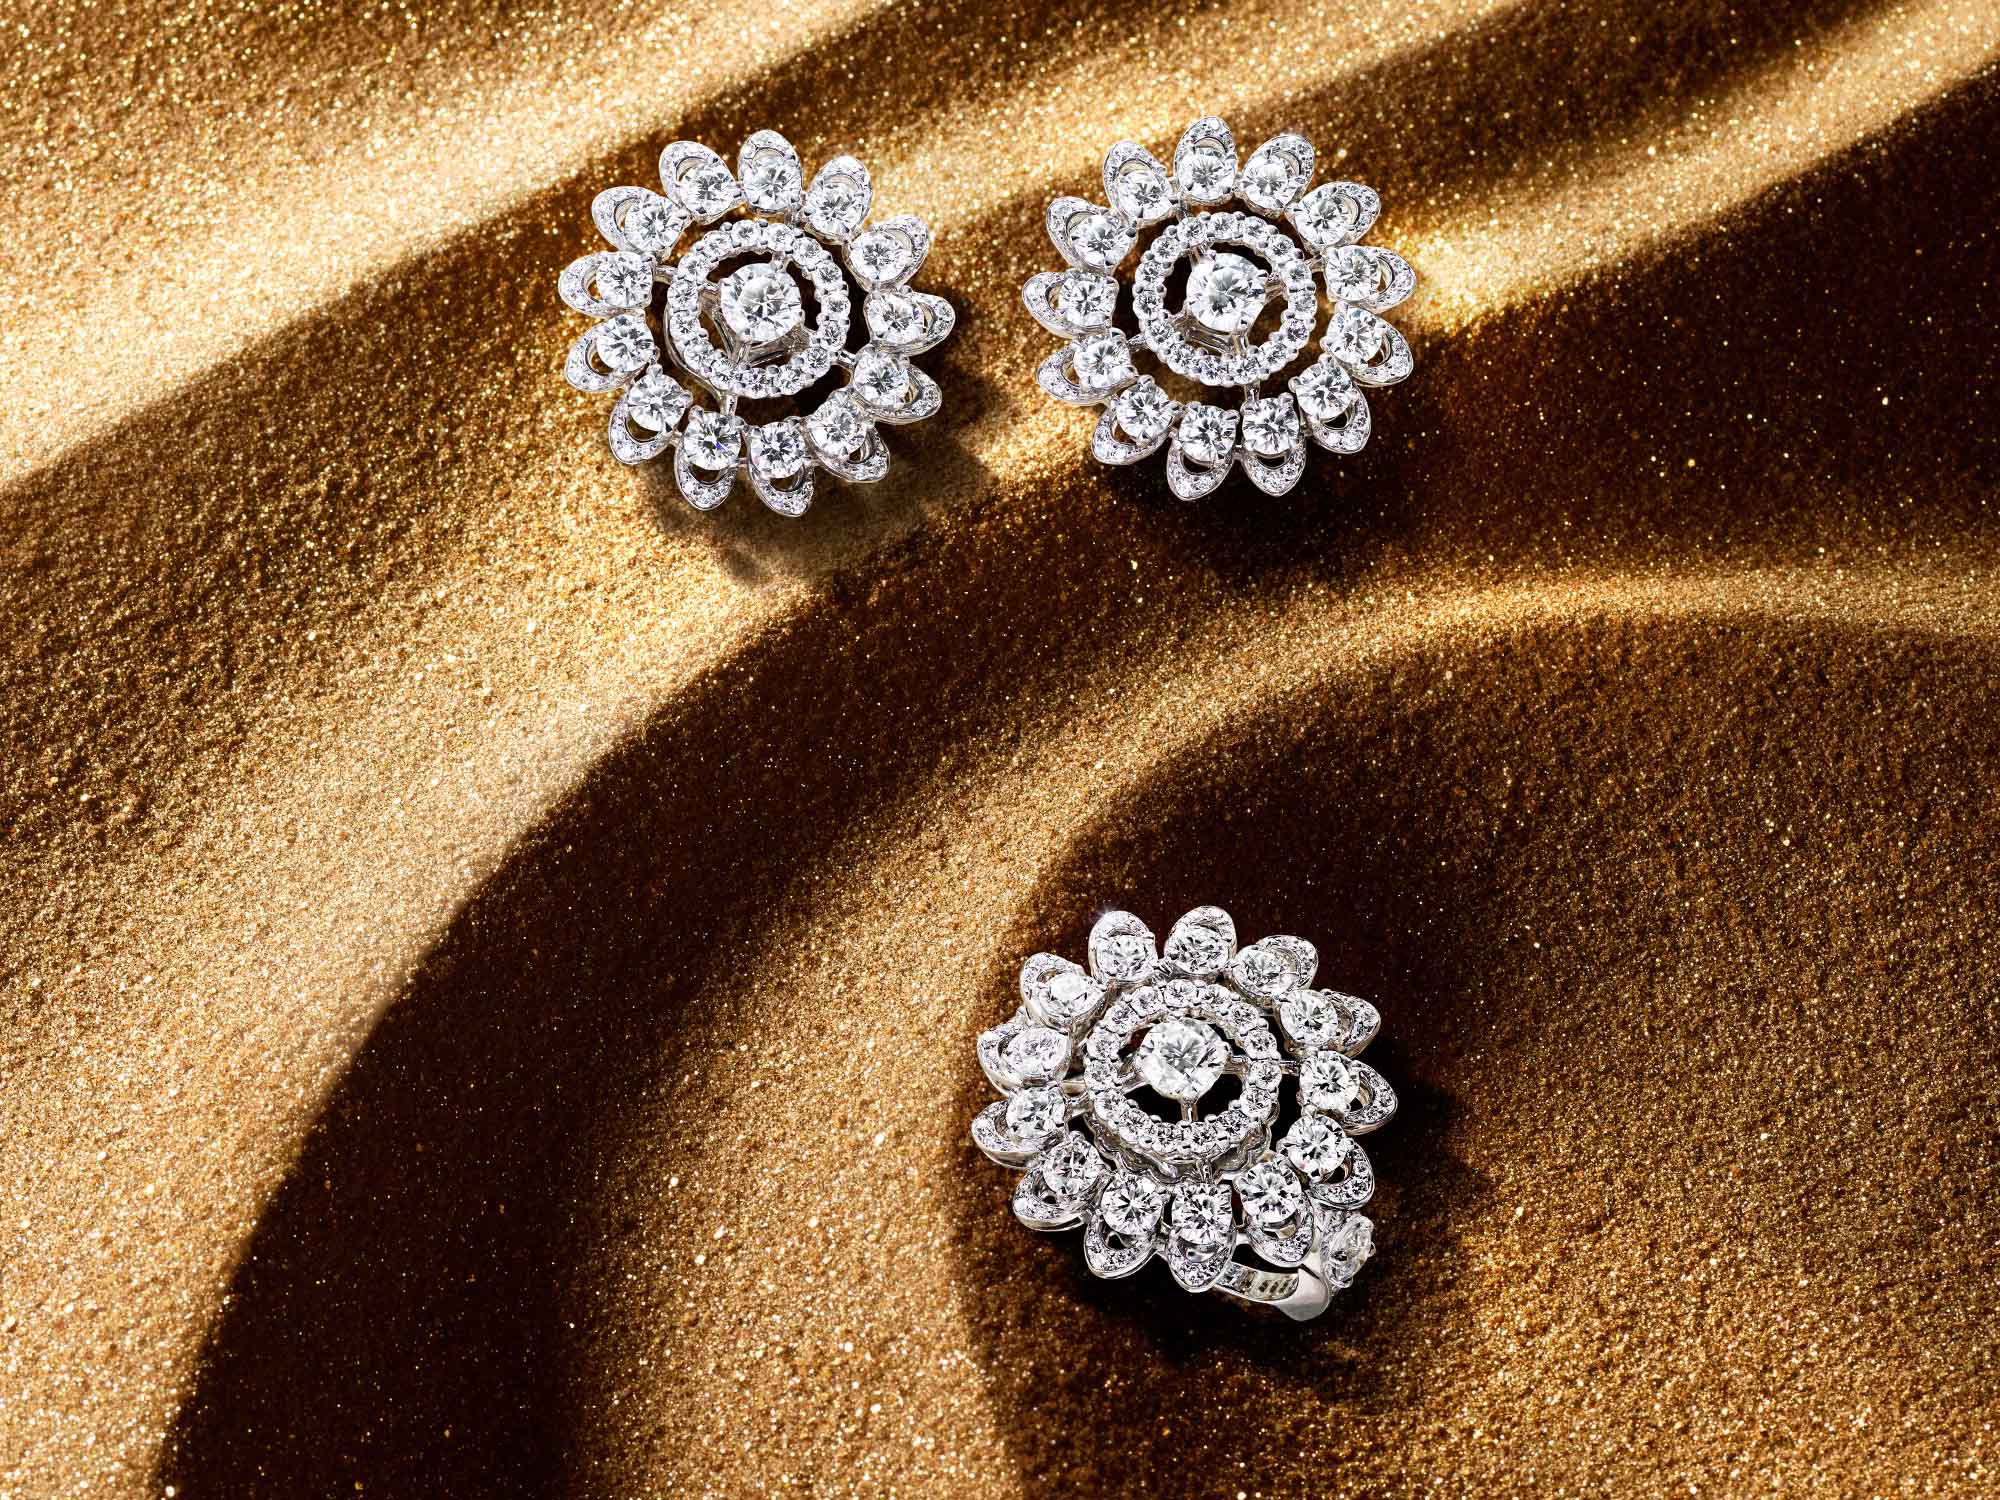 The Graff Gateway diamond earrings and ring from the Tribal jewellery collection, on sand